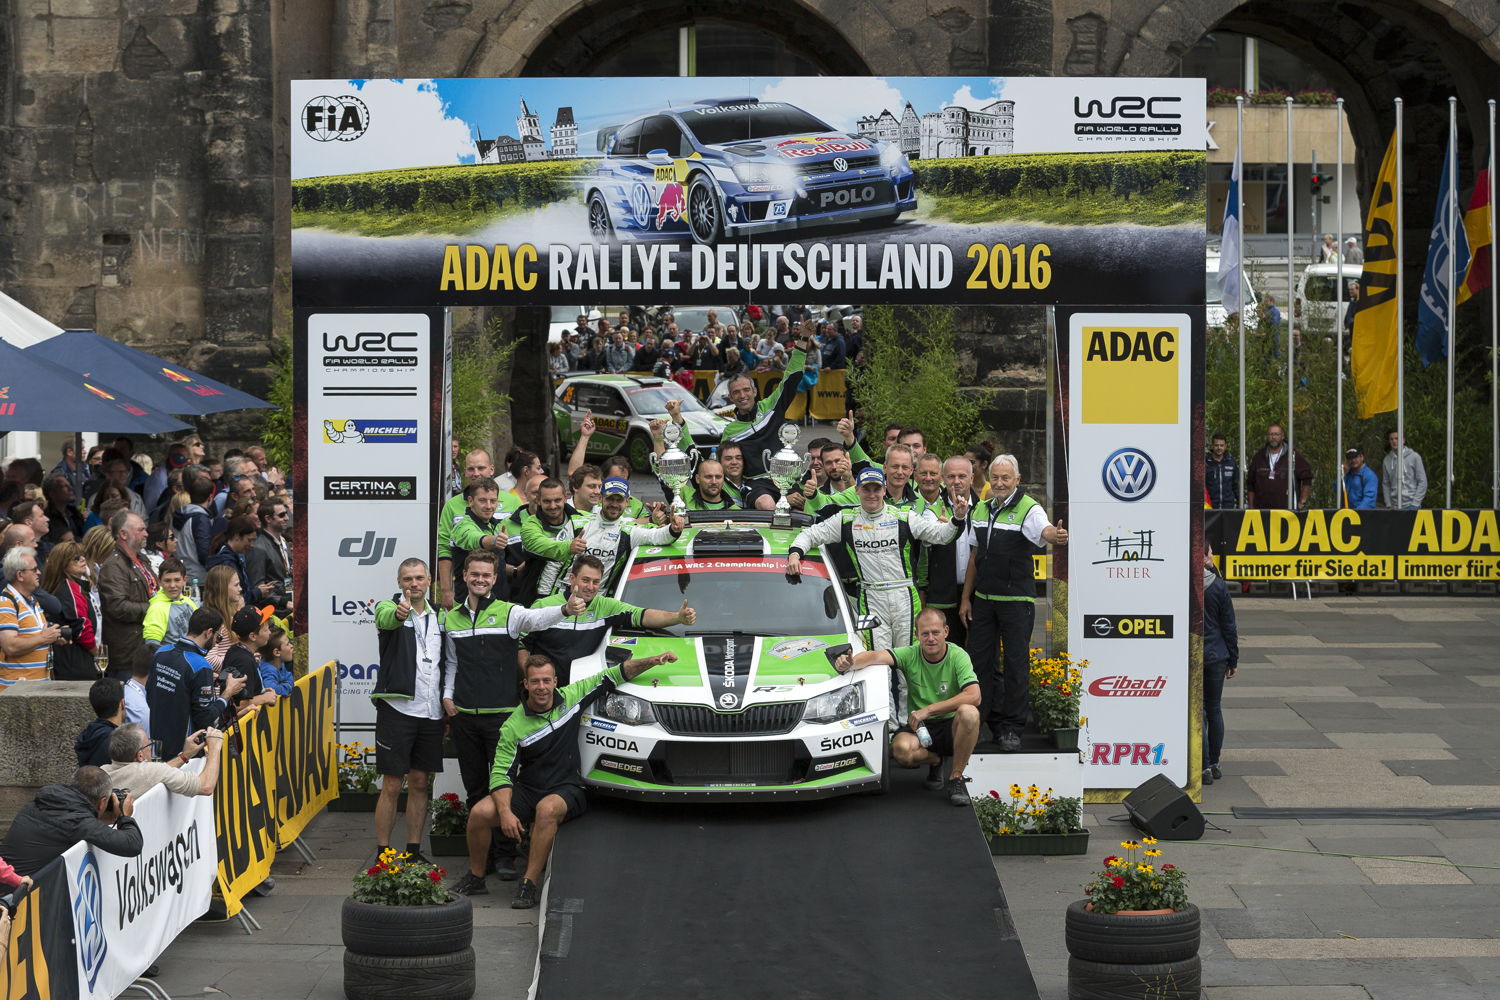 The triumph for the duo of Lappi/Ferm at this year’s Rally Germany also gave the ŠKODA Motorsport team cause for celebration.